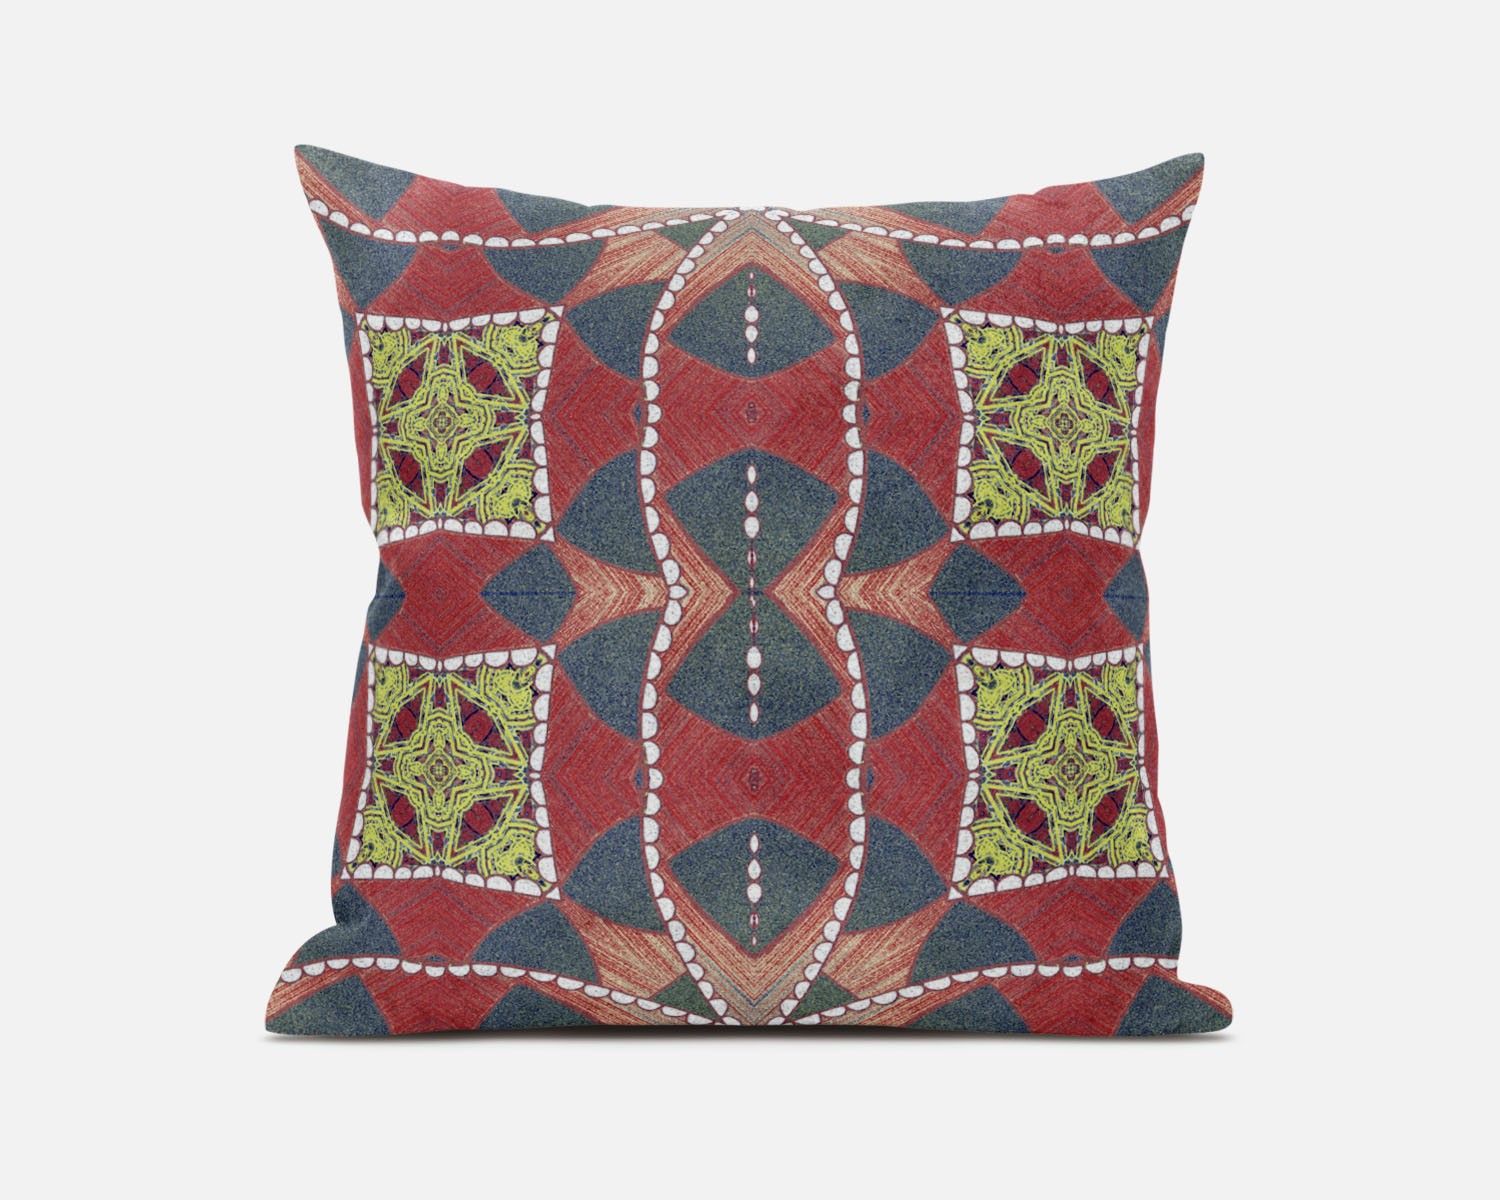 20"x20" Red Yellow Gray Zippered Suede Geometric Throw Pillow-417855-1